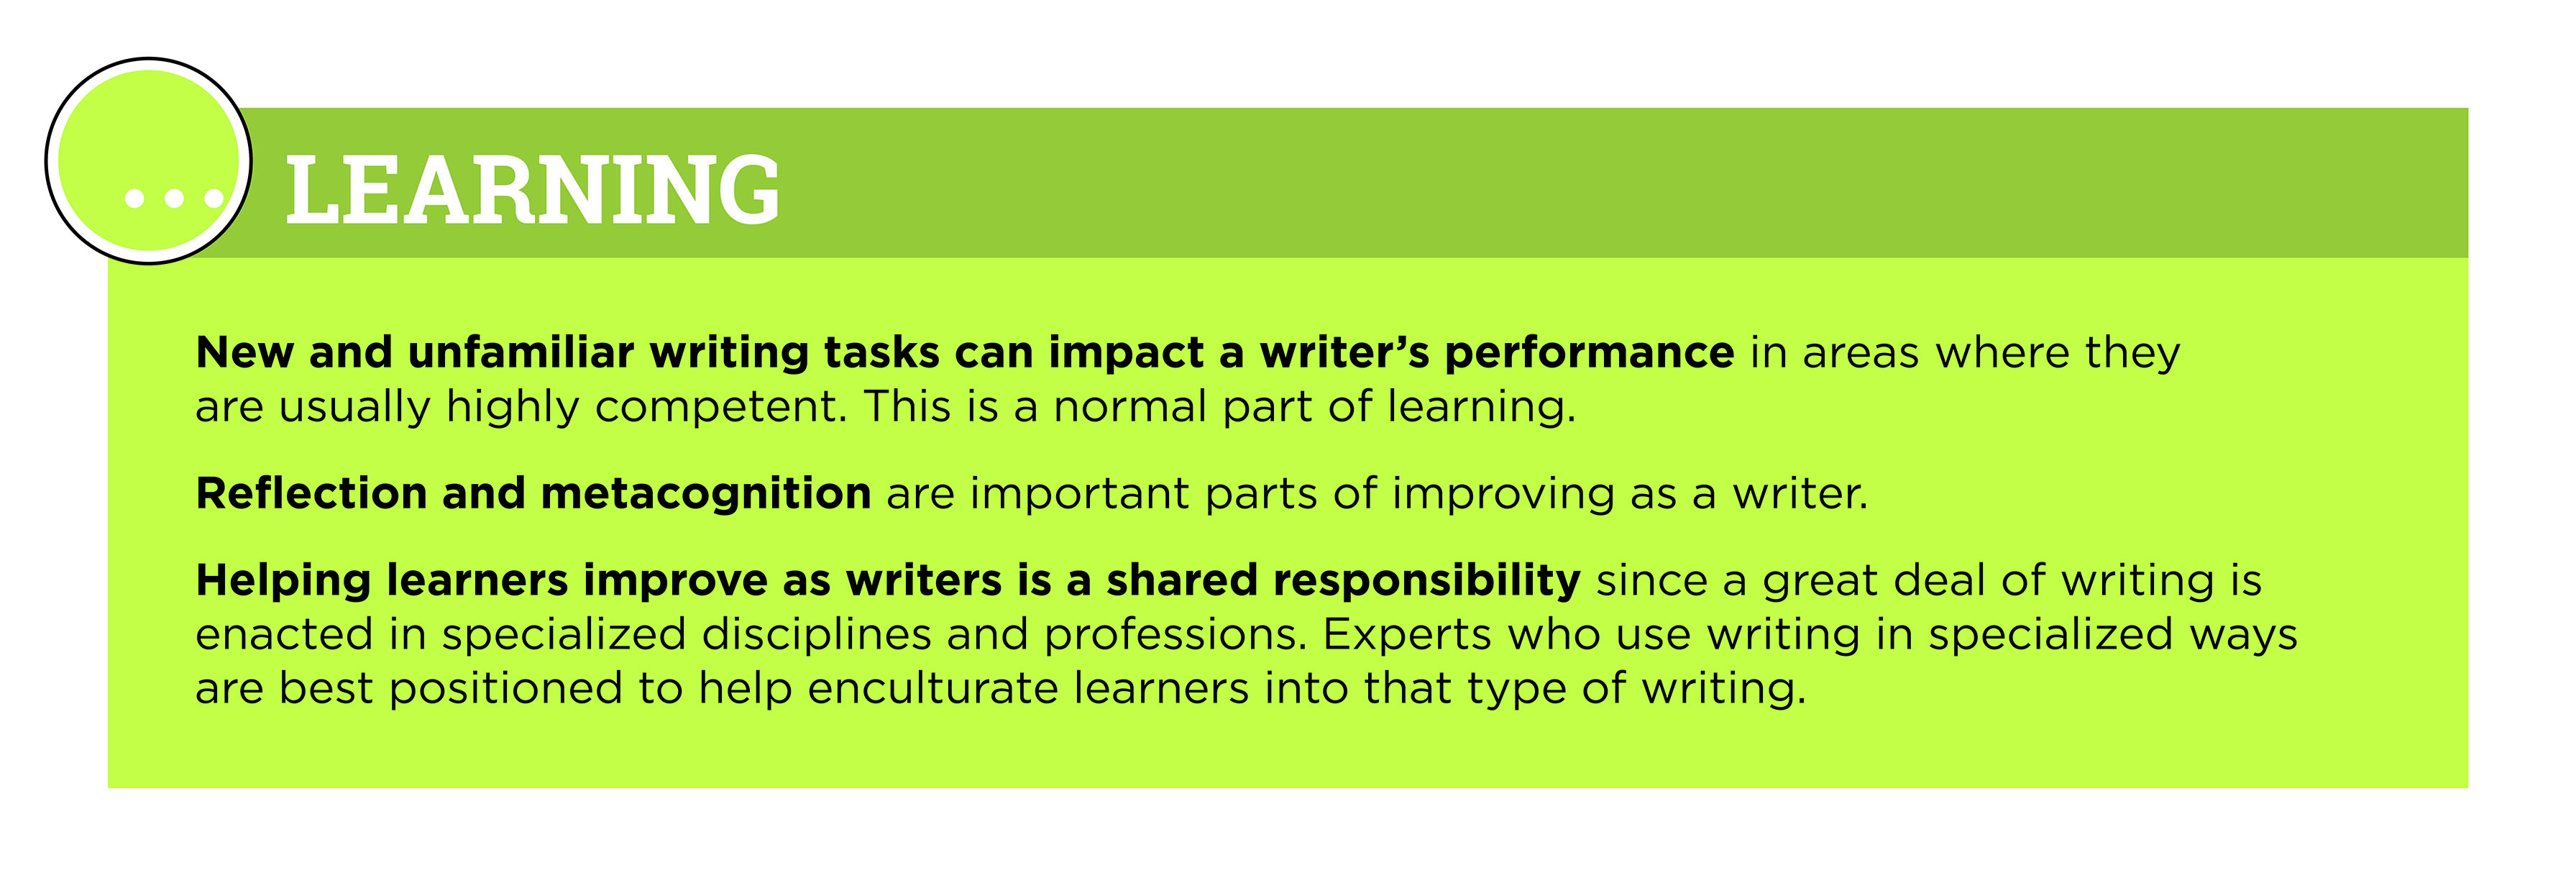 New and unfamiliar writing tasks can impact a writer's performance in areas where they are usually highly competent. This is a normal part of learning. Reflection and metacognition are important parts of improving as a writer. Helping learners improve as writers is a shared responsibility since a great deal of writing is enacted in specialized disciplines and professions. Experts who use writing in specialized ways are best positioned to help enculturate learners into that type of writing.